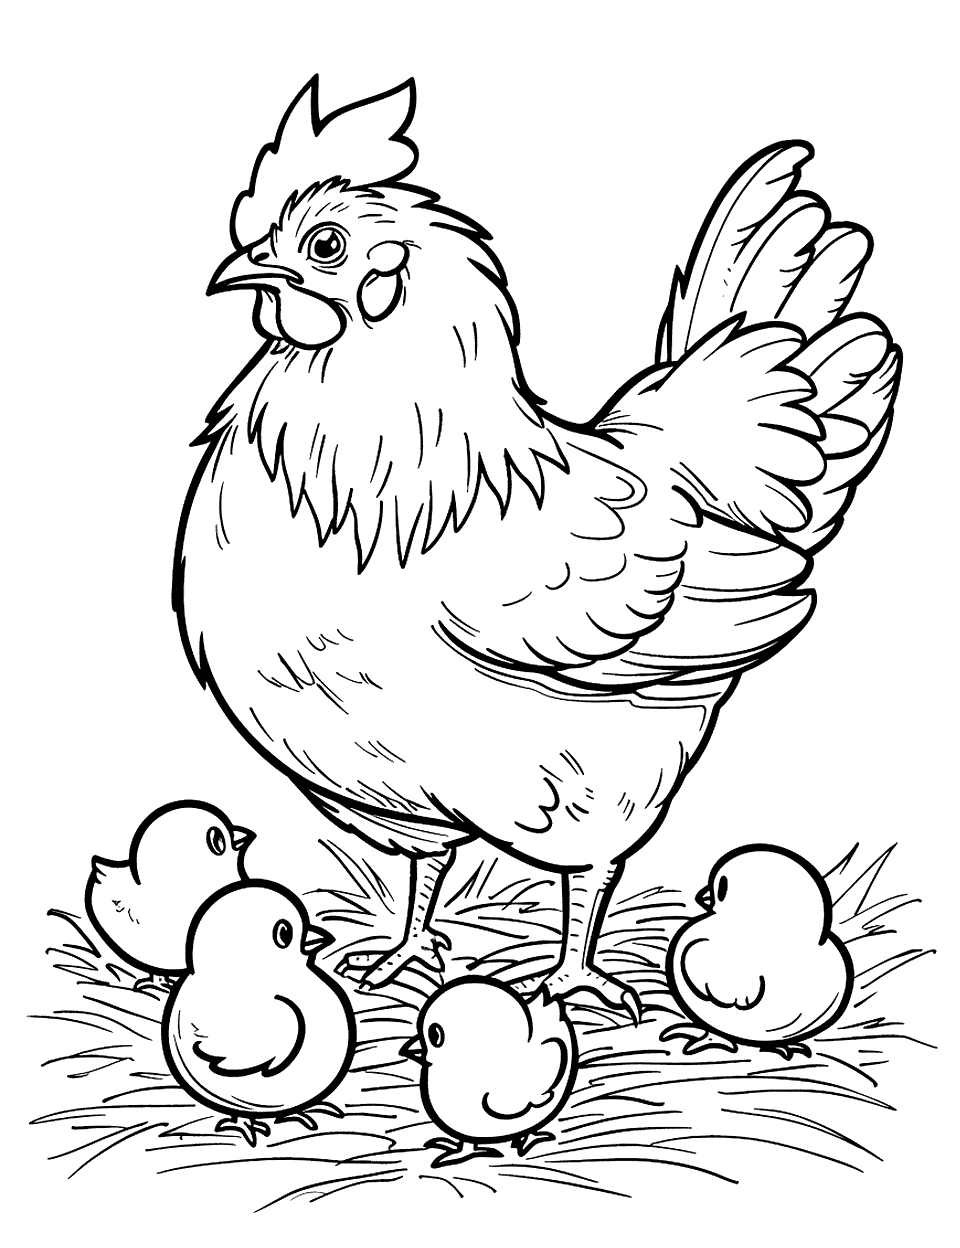 Mother Hen Teaching Chicks Chicken Coloring Page - A mother hen surrounded by her chicks.